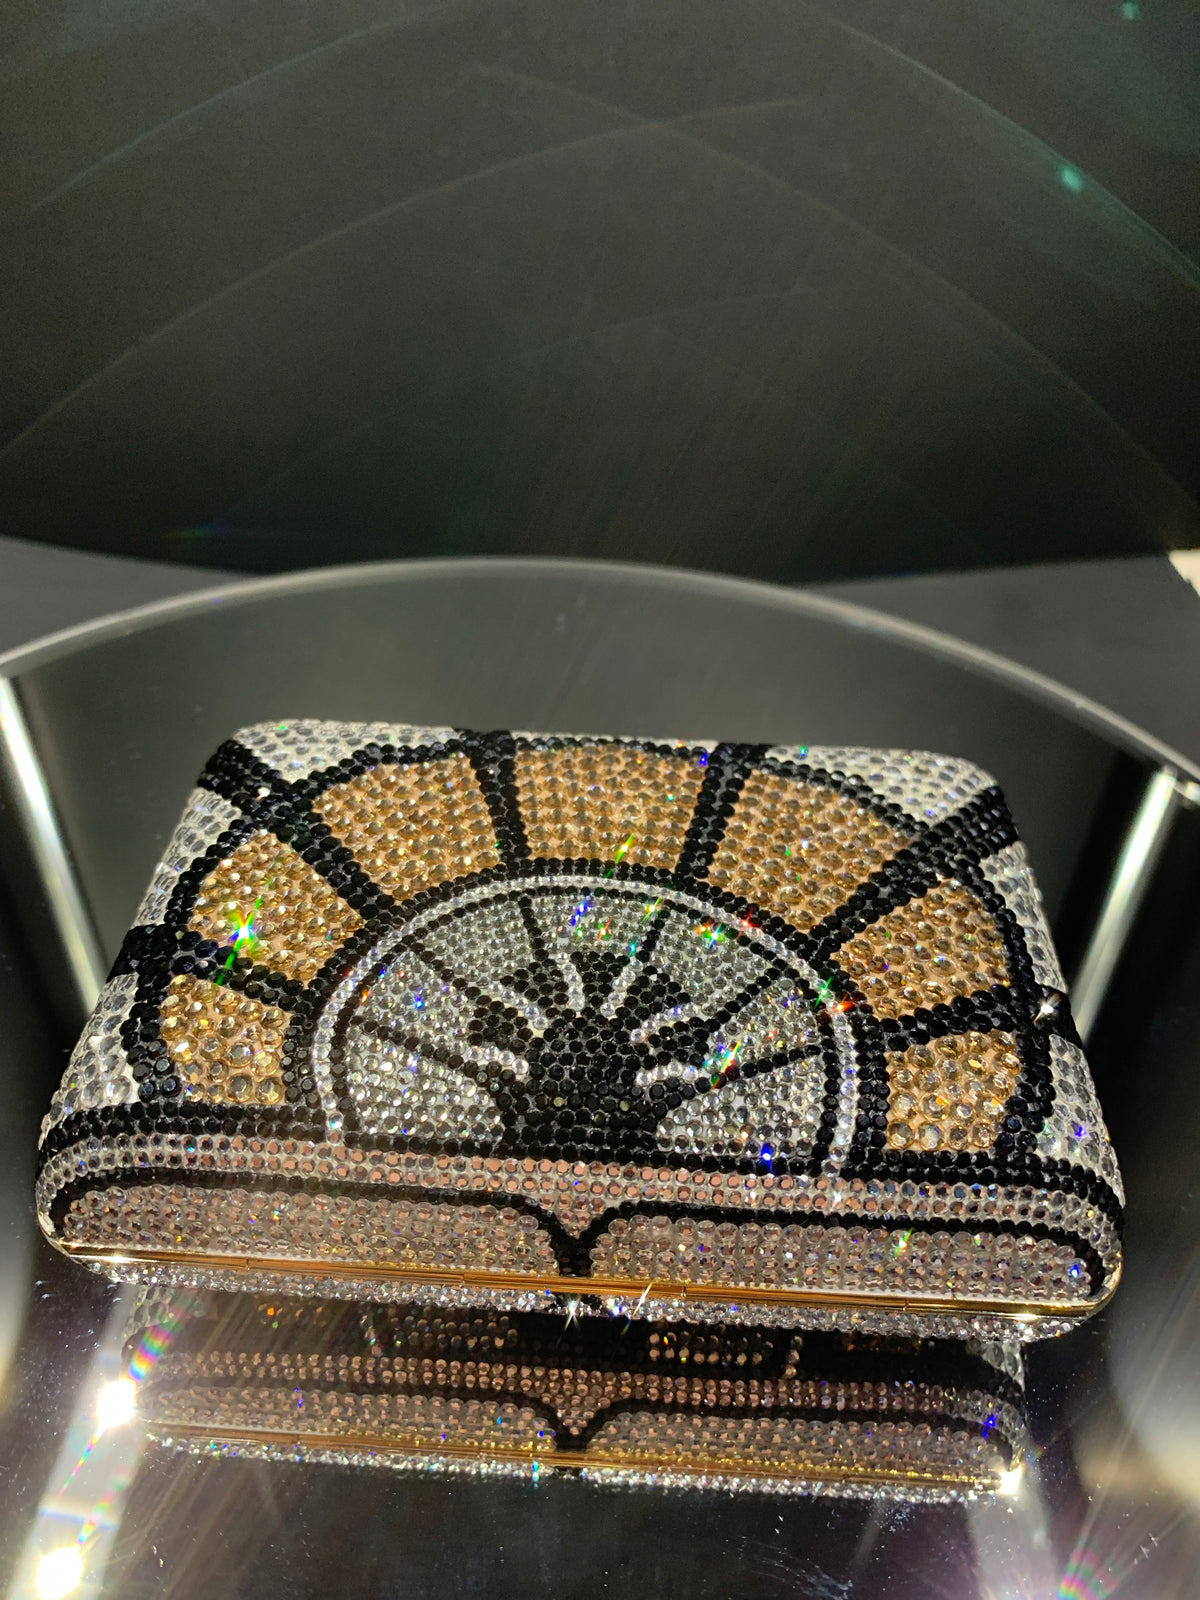 &quot;Sunrise&quot; Limited Edition Crystal Handbag by Judith Leiber